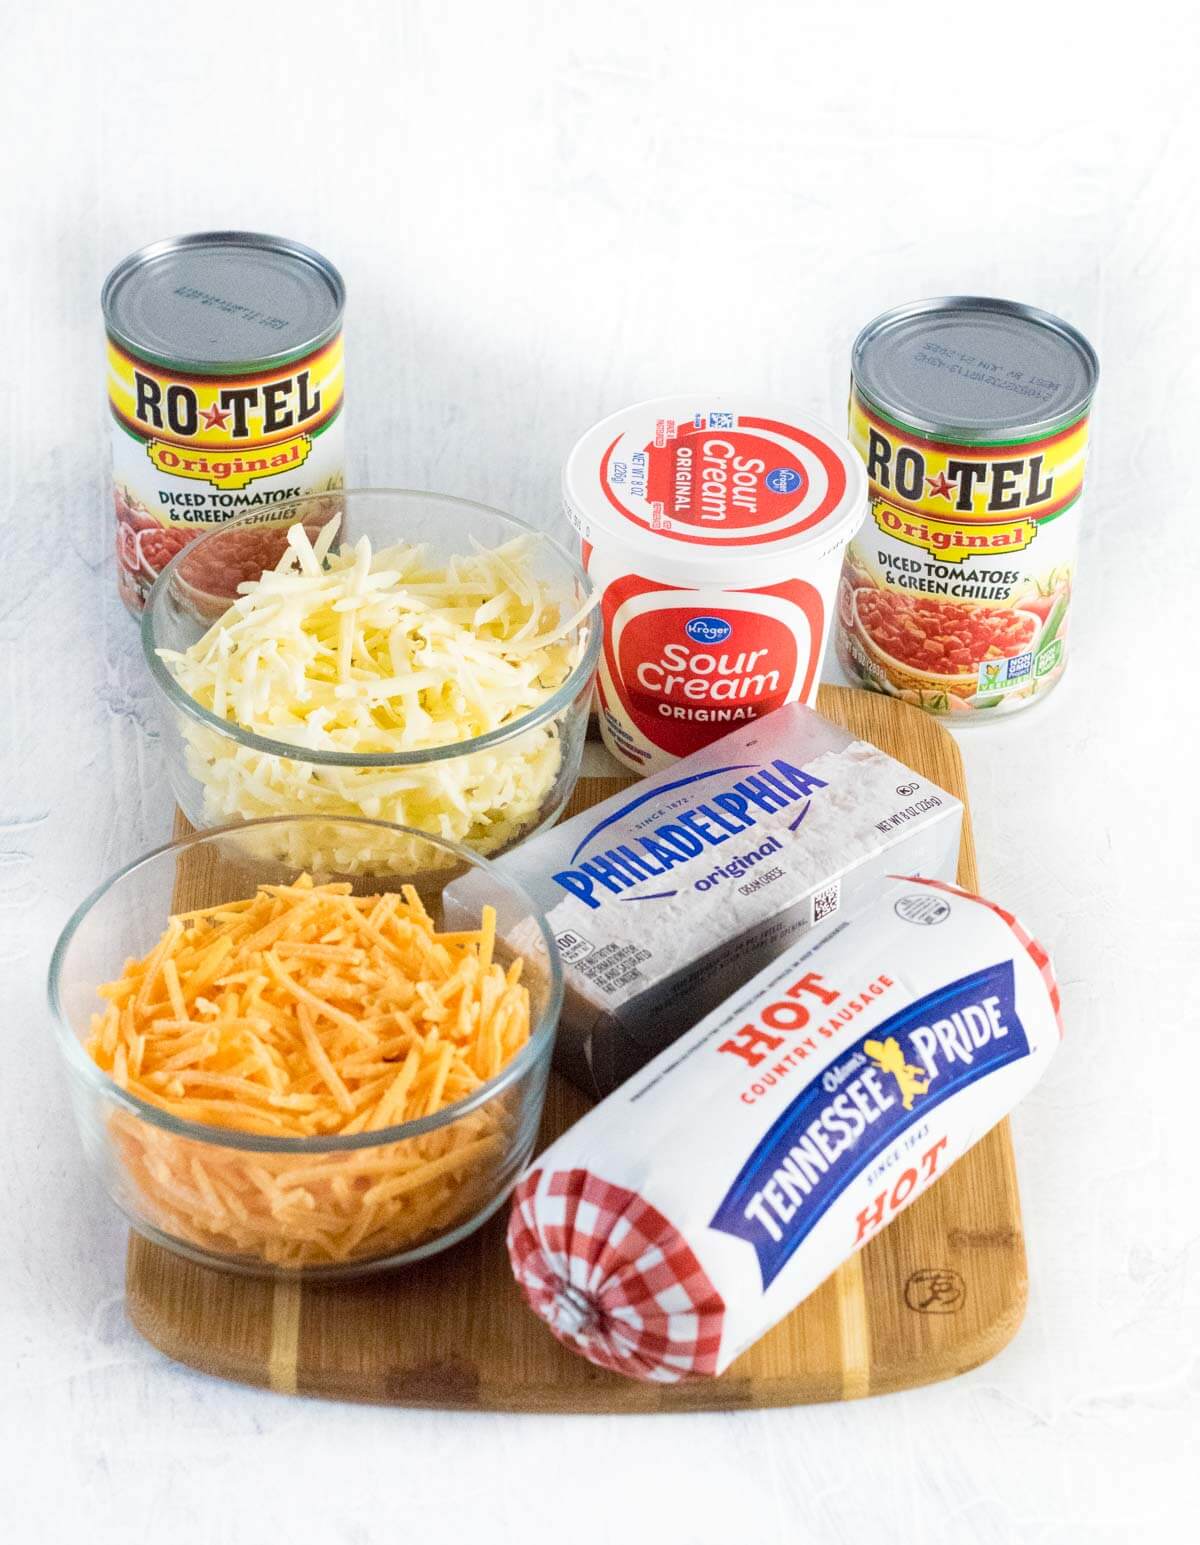 Showing ingredients needed for queso sausage dip.